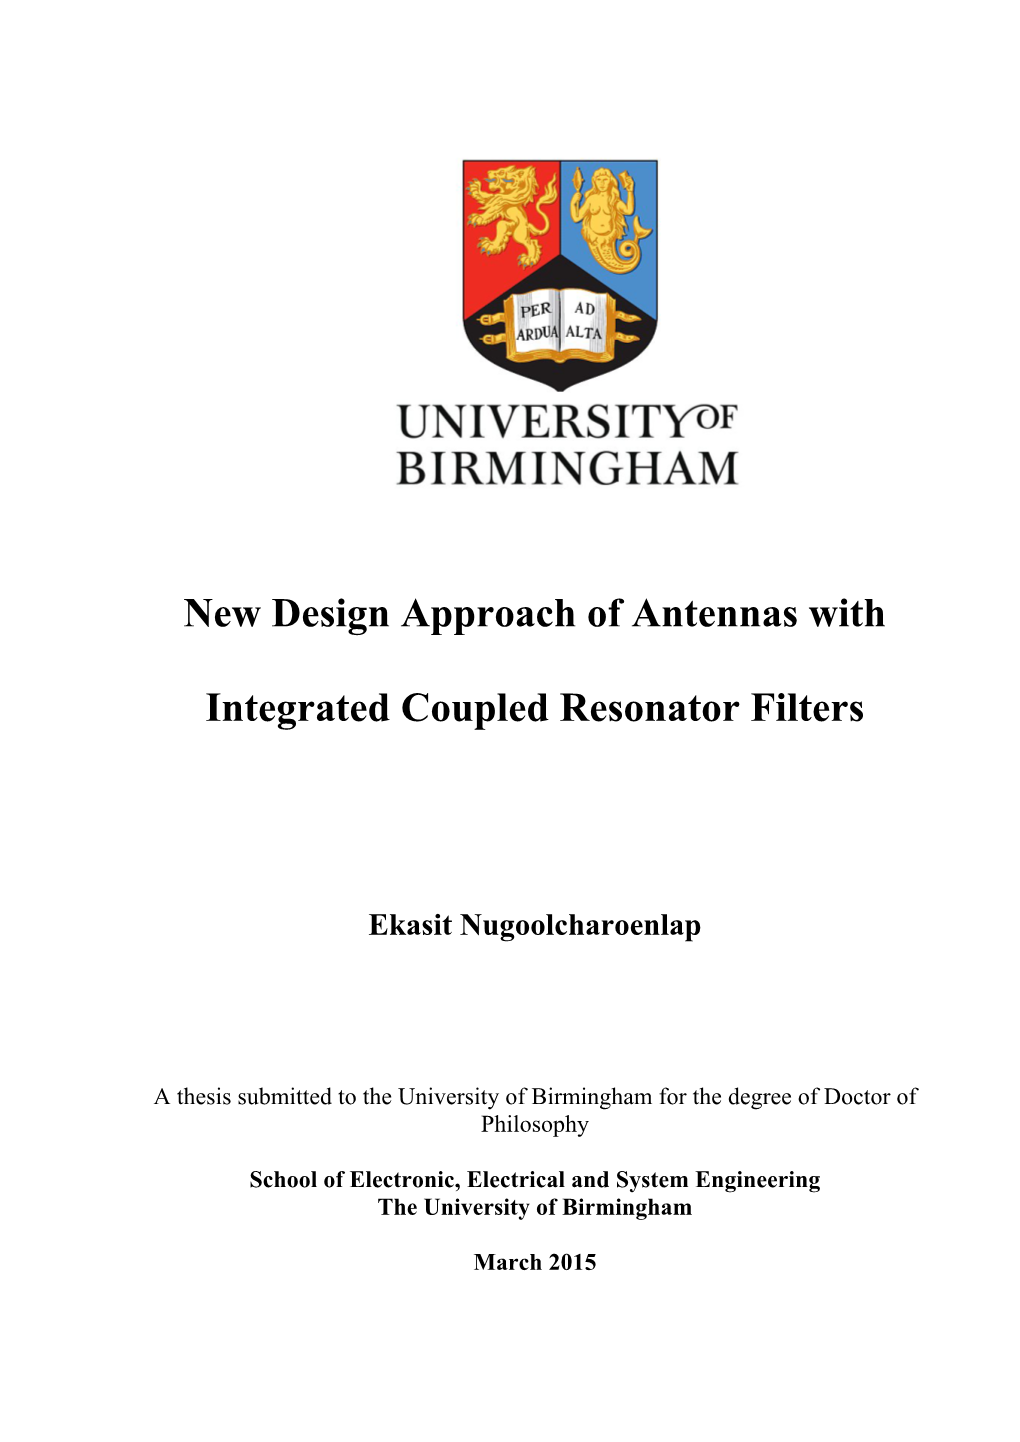 New Design Approach of Antennas with Integrated Coupled Resonator